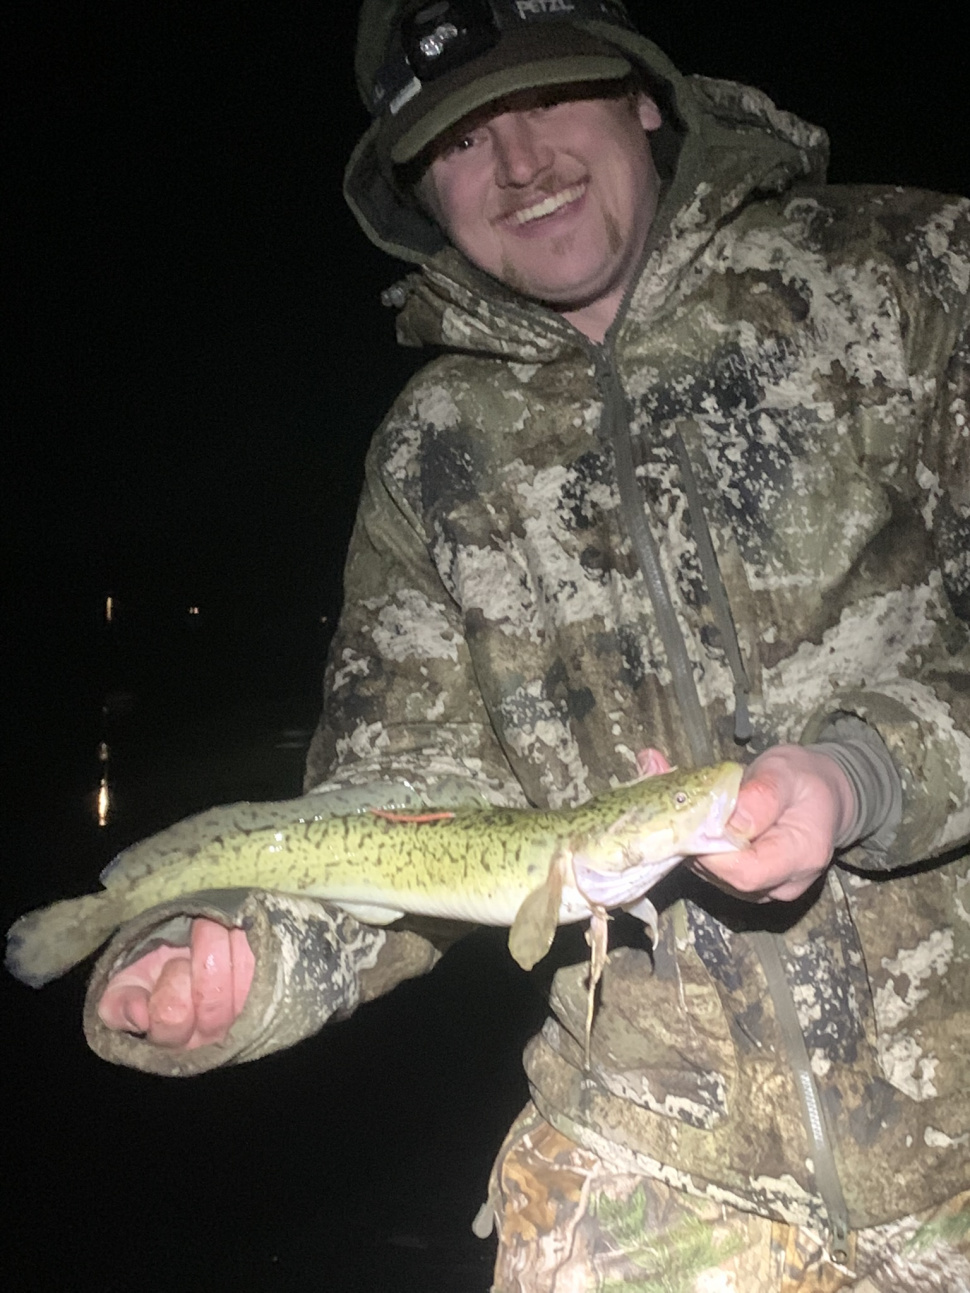 Angler with a burbot from the Kootenai River